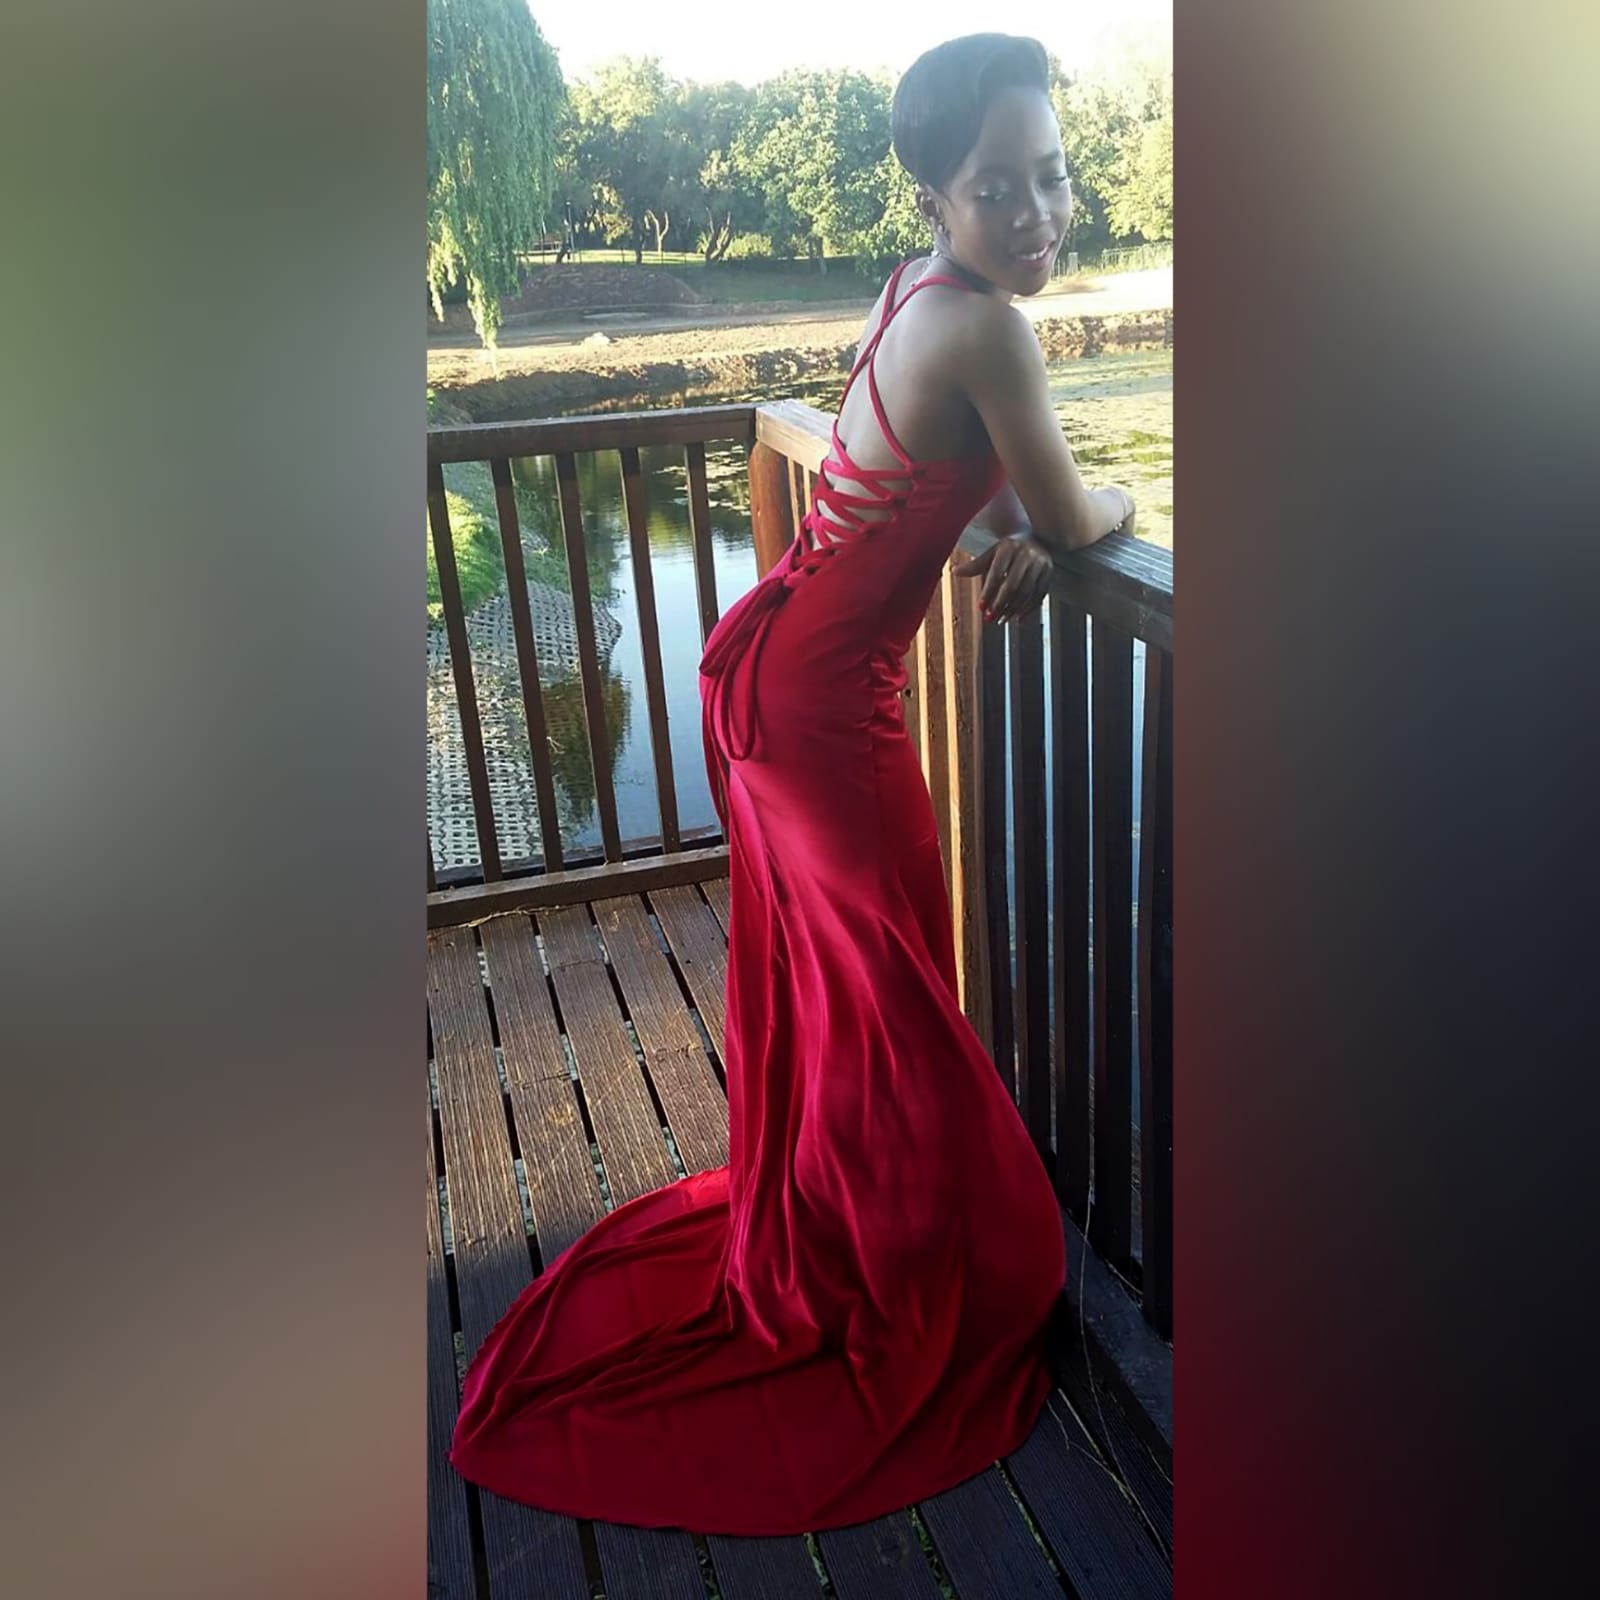 Red velvet long fitted evening party dress 1 red velvet long fitted evening party dress. This design has a laceup back which adds a stunning look to it and also helps adjust the dress fit. It has a high slit and a train for a dramatic effect.